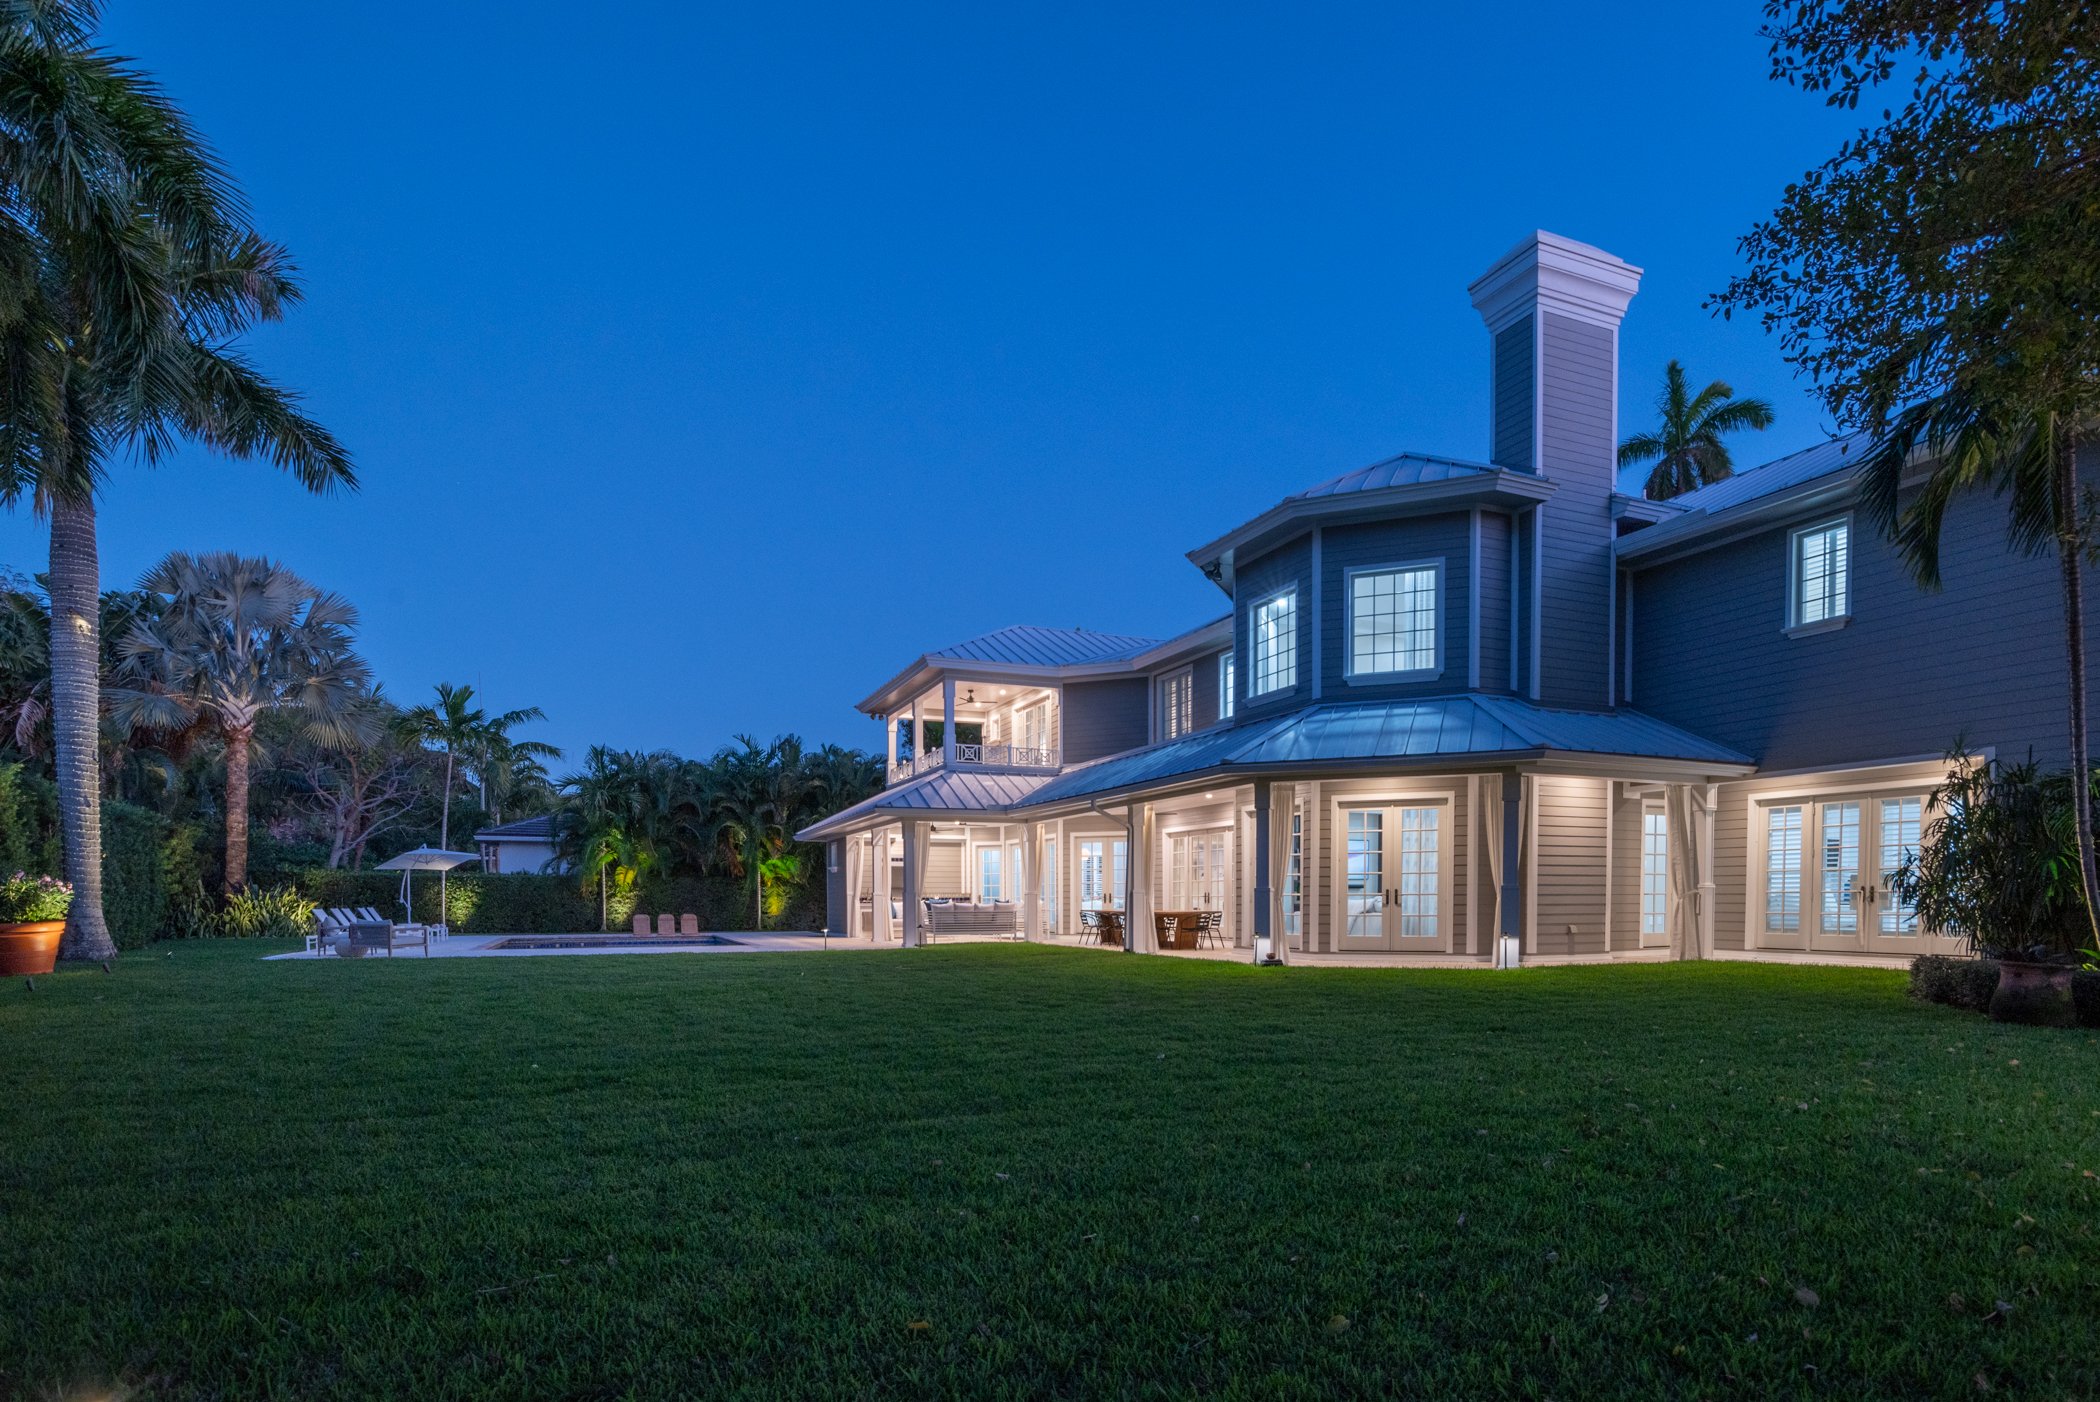 Check Out This Newly Renovated Coastal Contemporary In The Exclusive Point Manalapan Which Just Listed For $7.995 Million 126.jpg